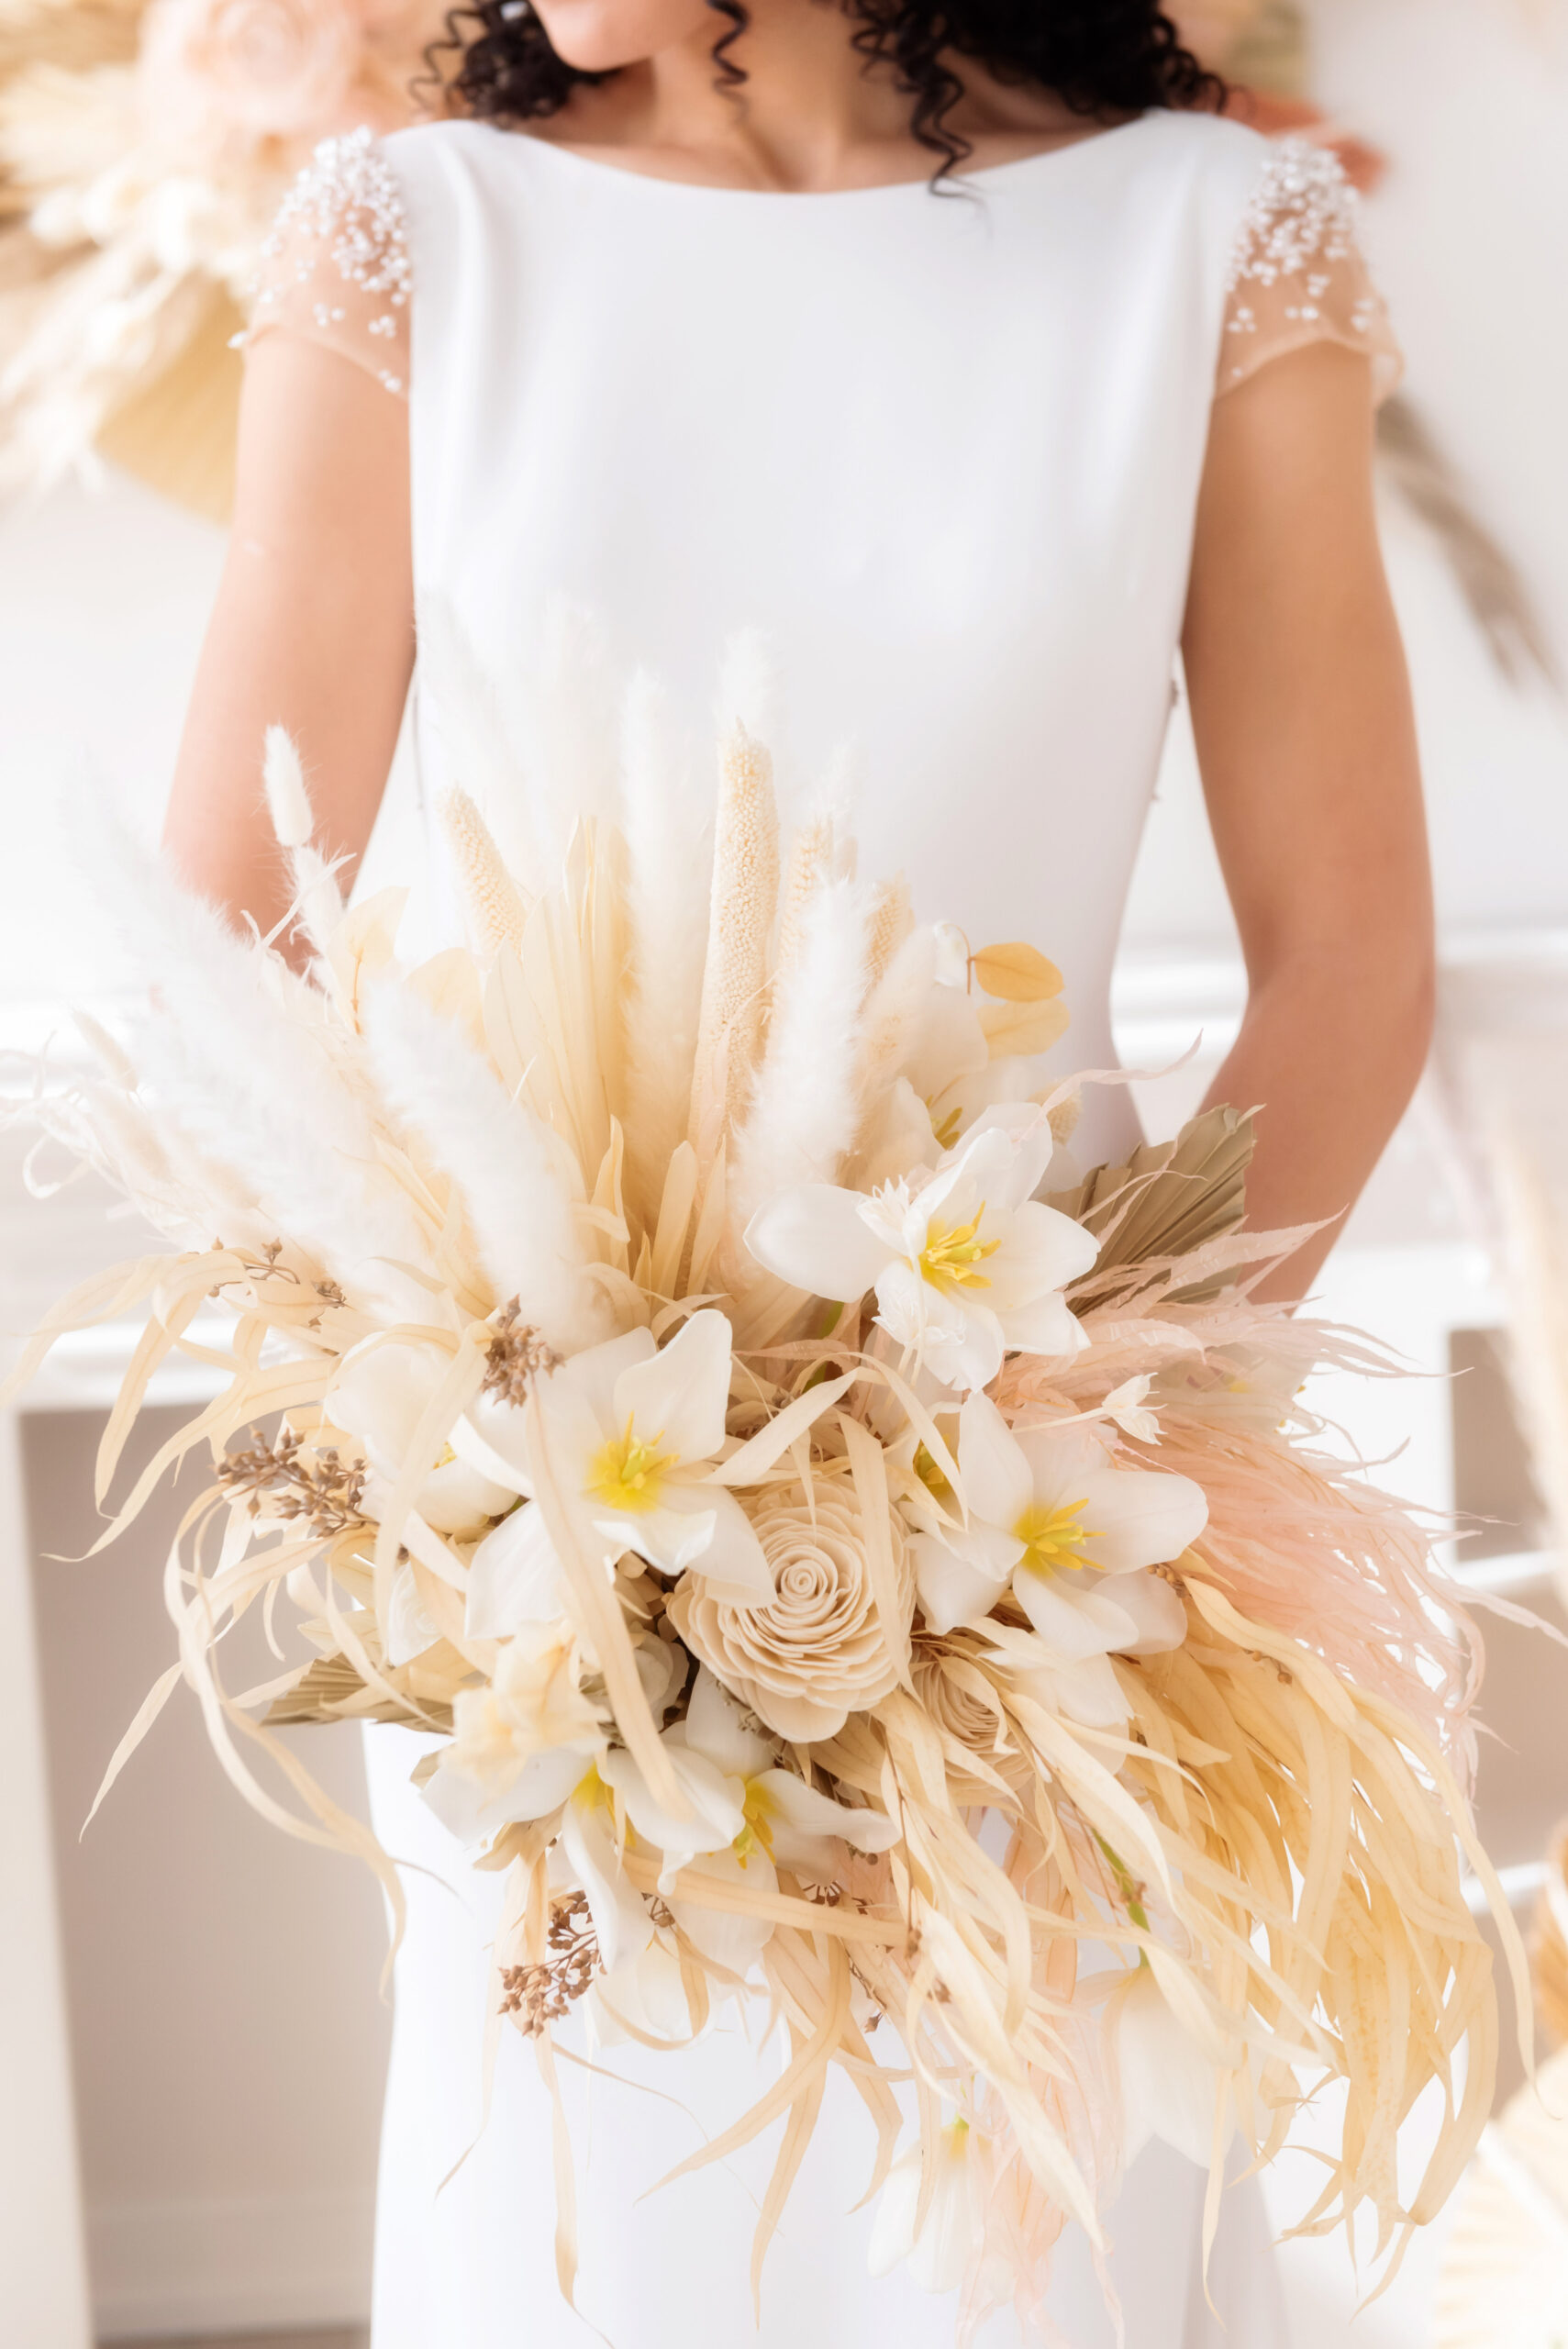 Wedding bouquet with natural grasses, cream and ivory coloured flowers